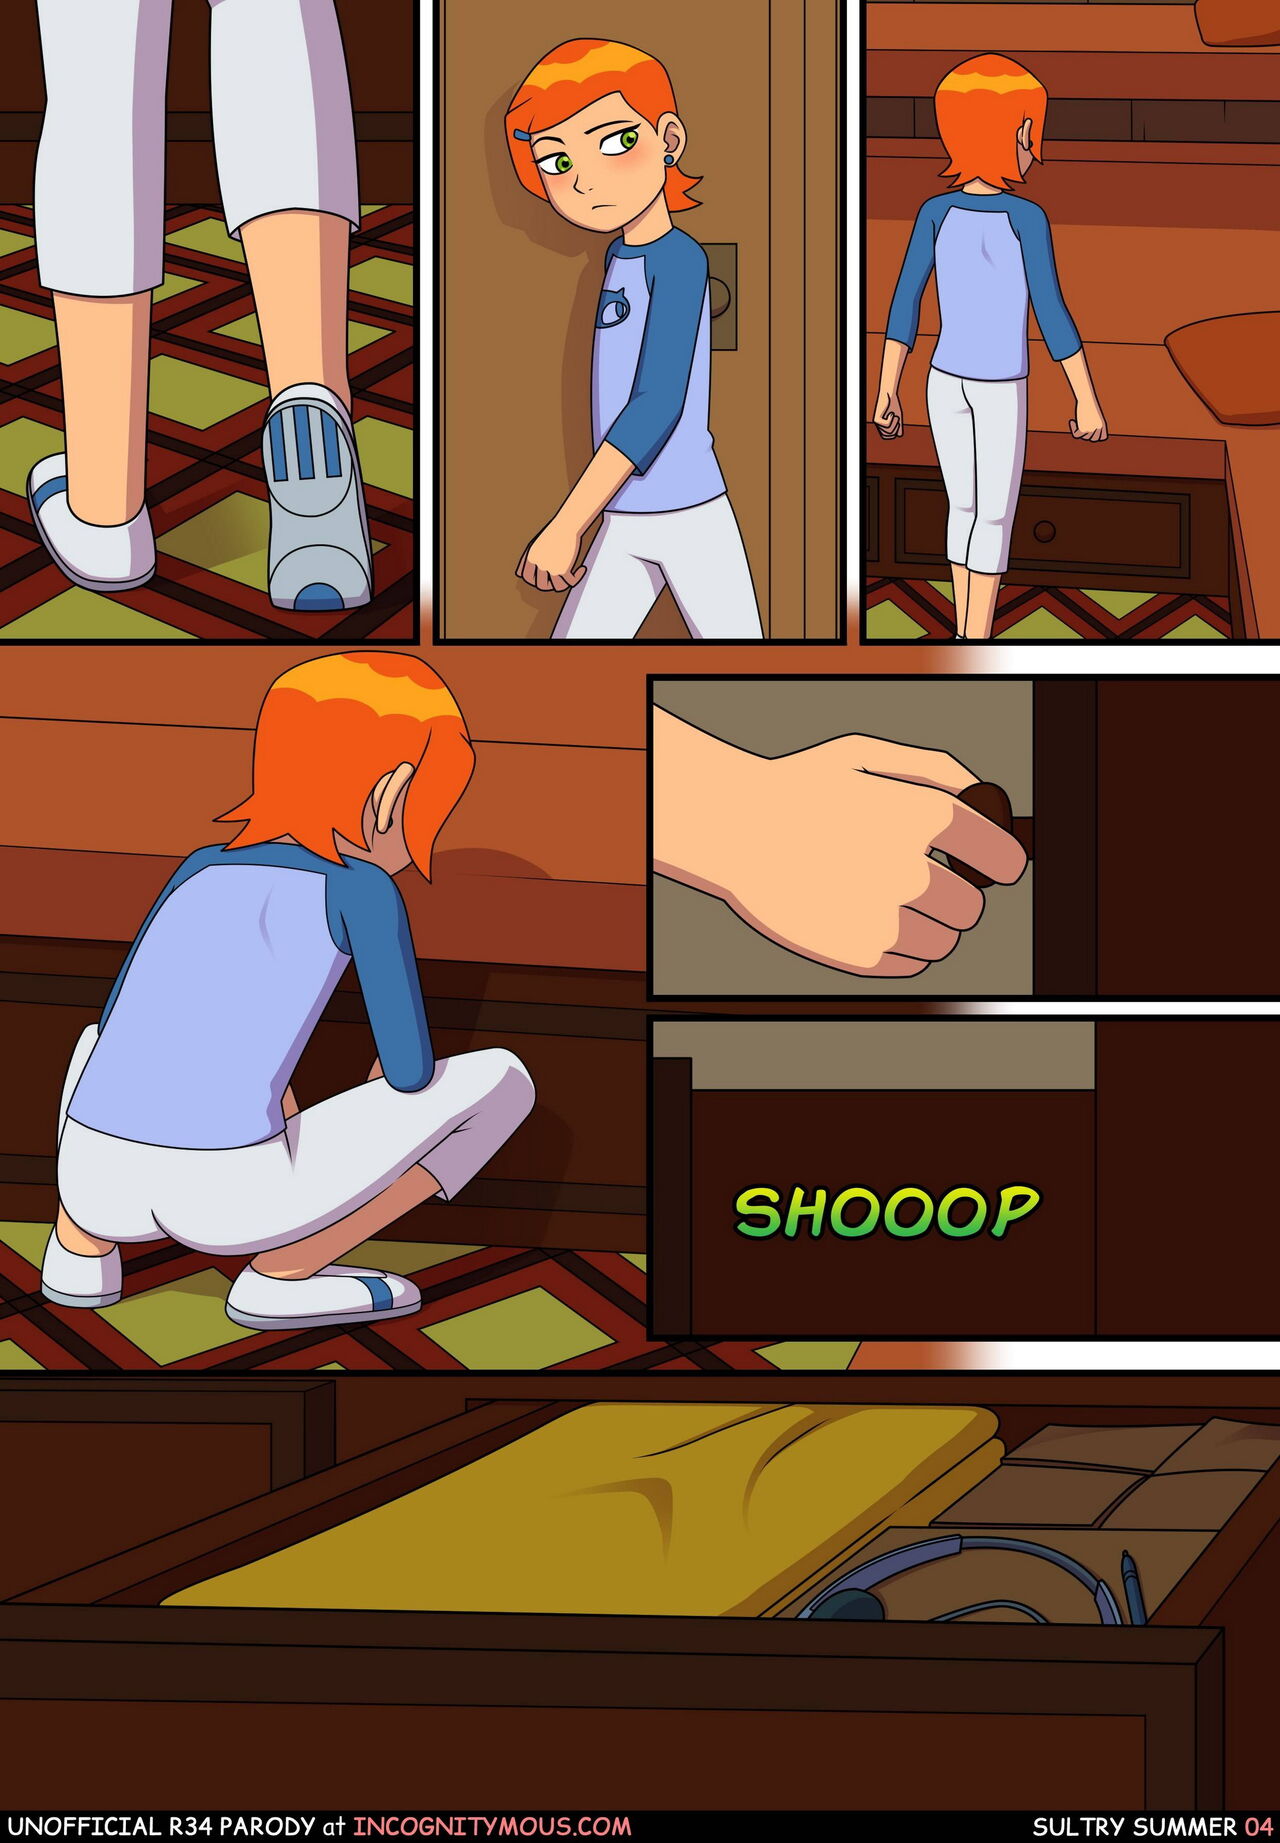 Incognitymous - Sultry Summer Ben 10 - Page 5 - IMHentai